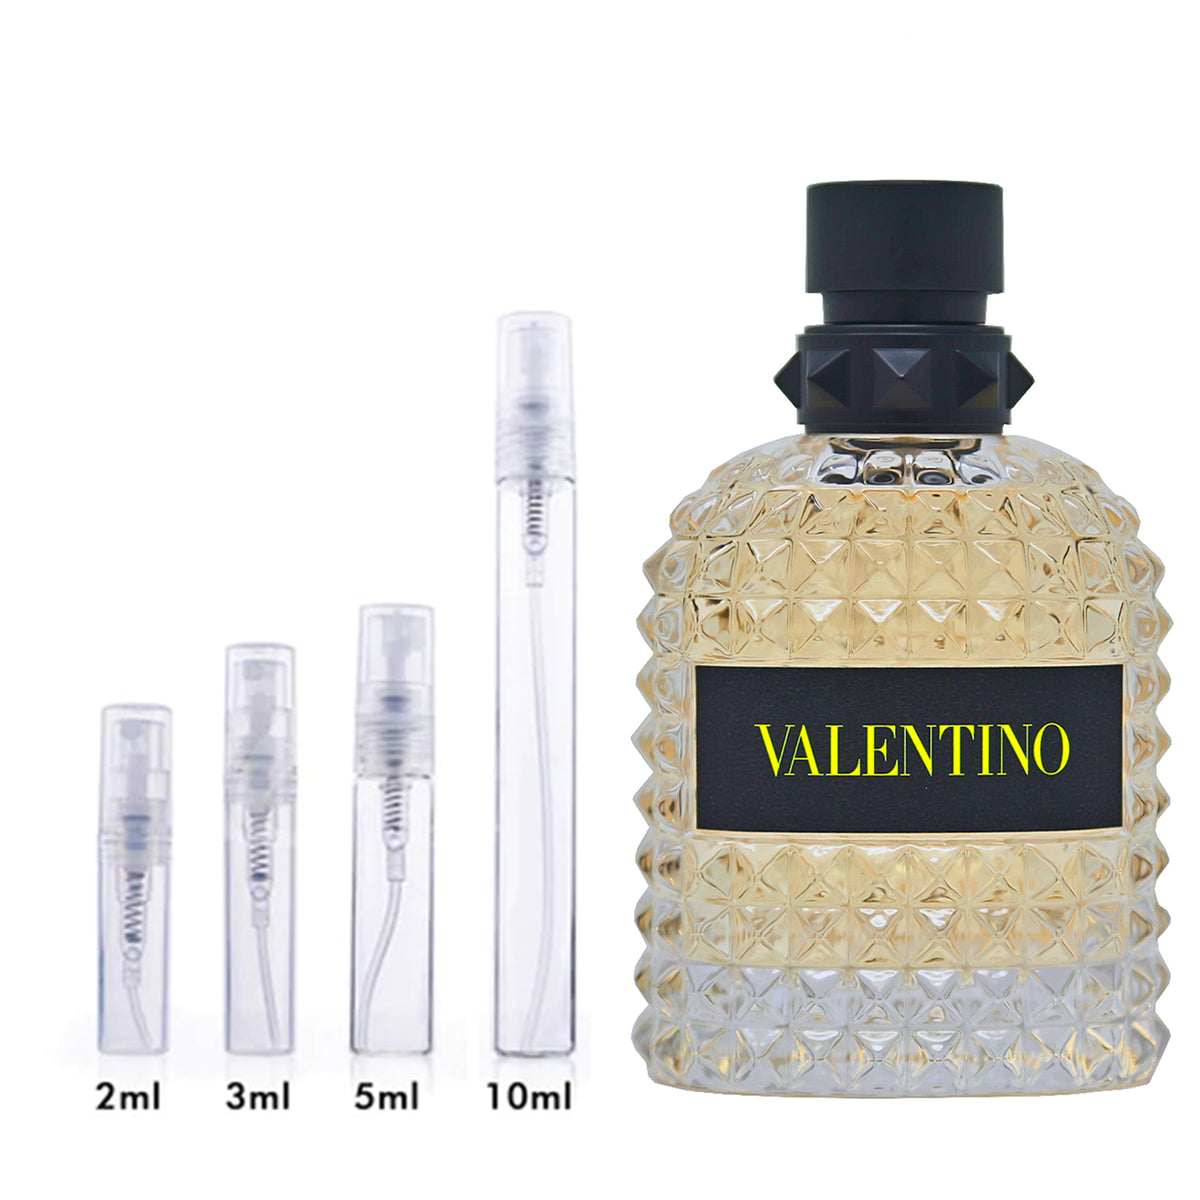 Uomo Born and Size Eau Samples by Roma DecantX Sampler Fragrance Scent | Valentino Toilette Atomizer Dream de Yellow In Travel | Perfume